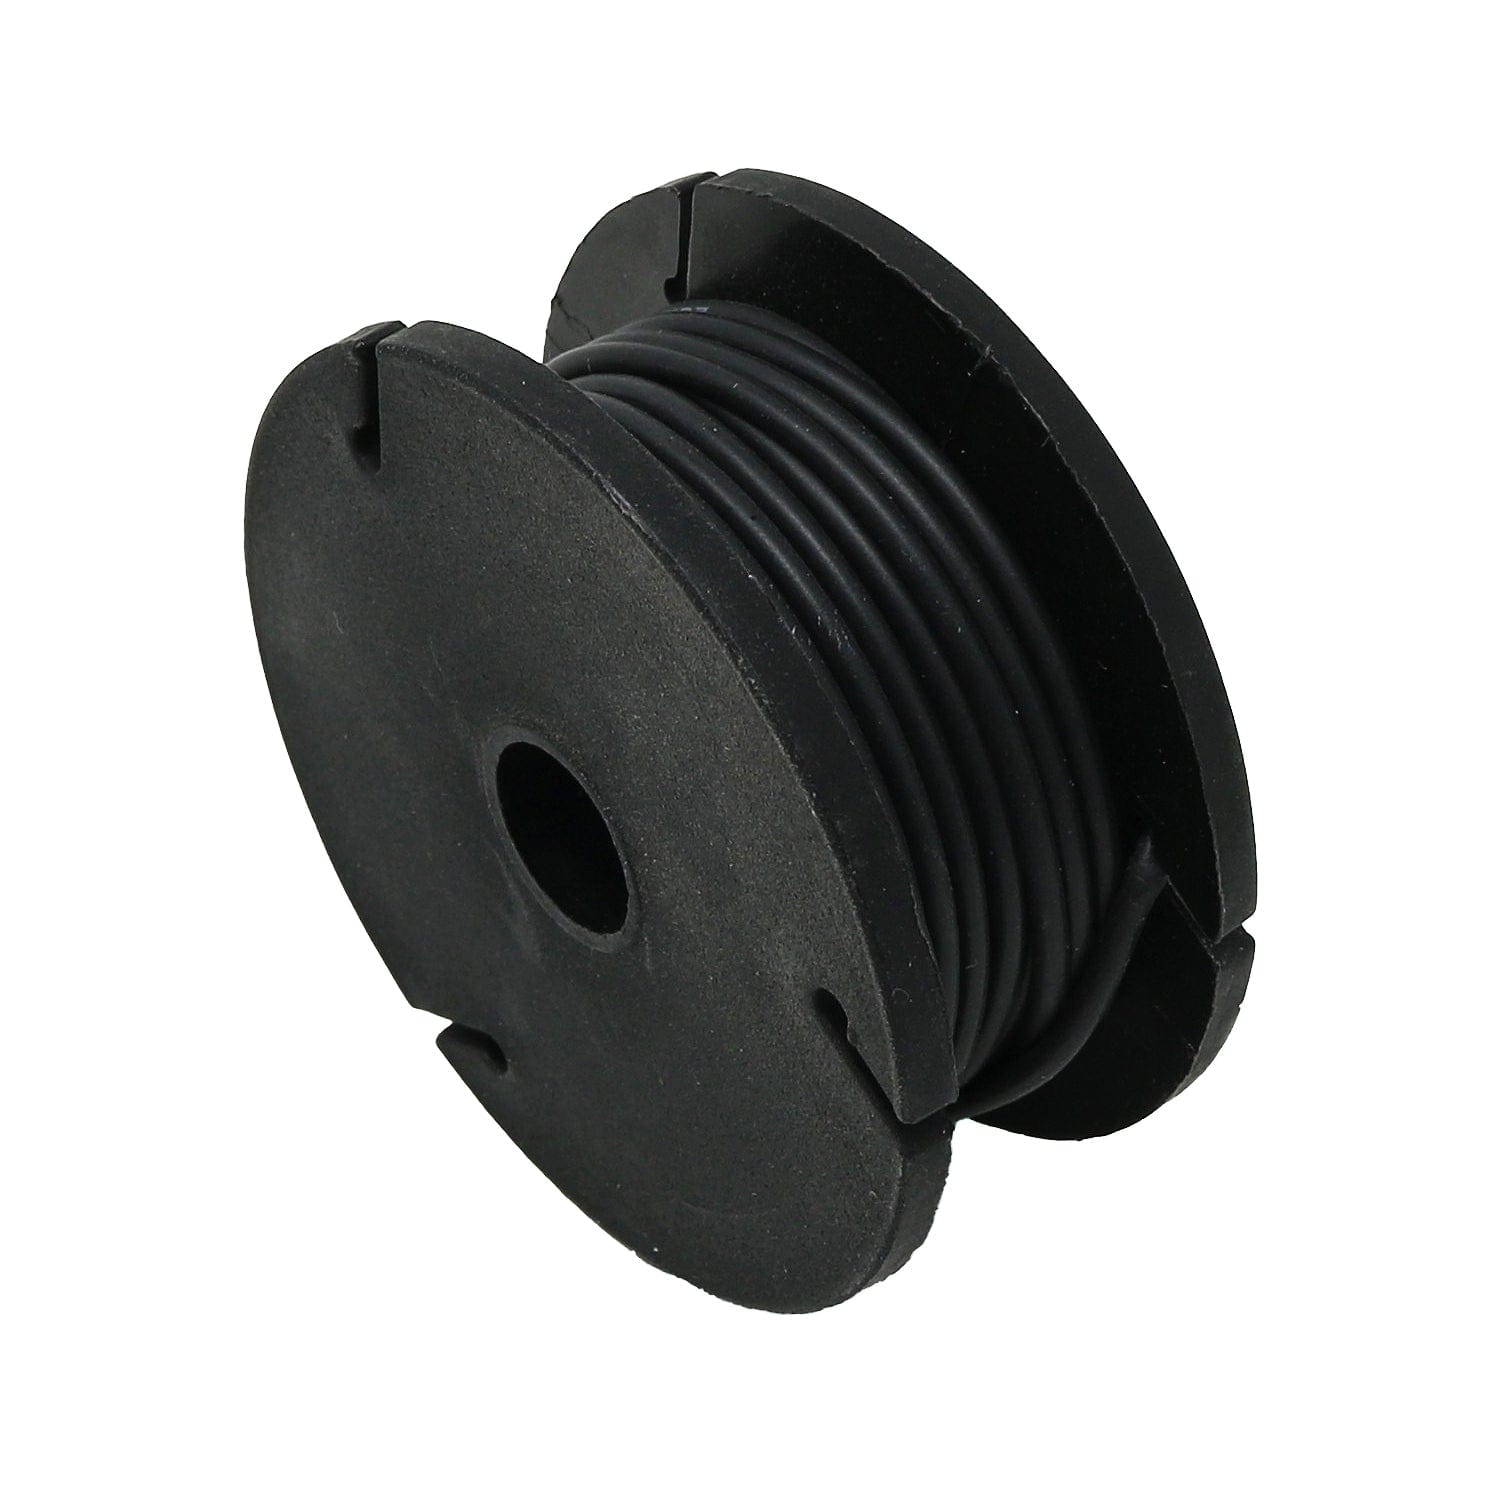 Silicone Cover Stranded-Core Wire - 25ft 26AWG - Black - The Pi Hut